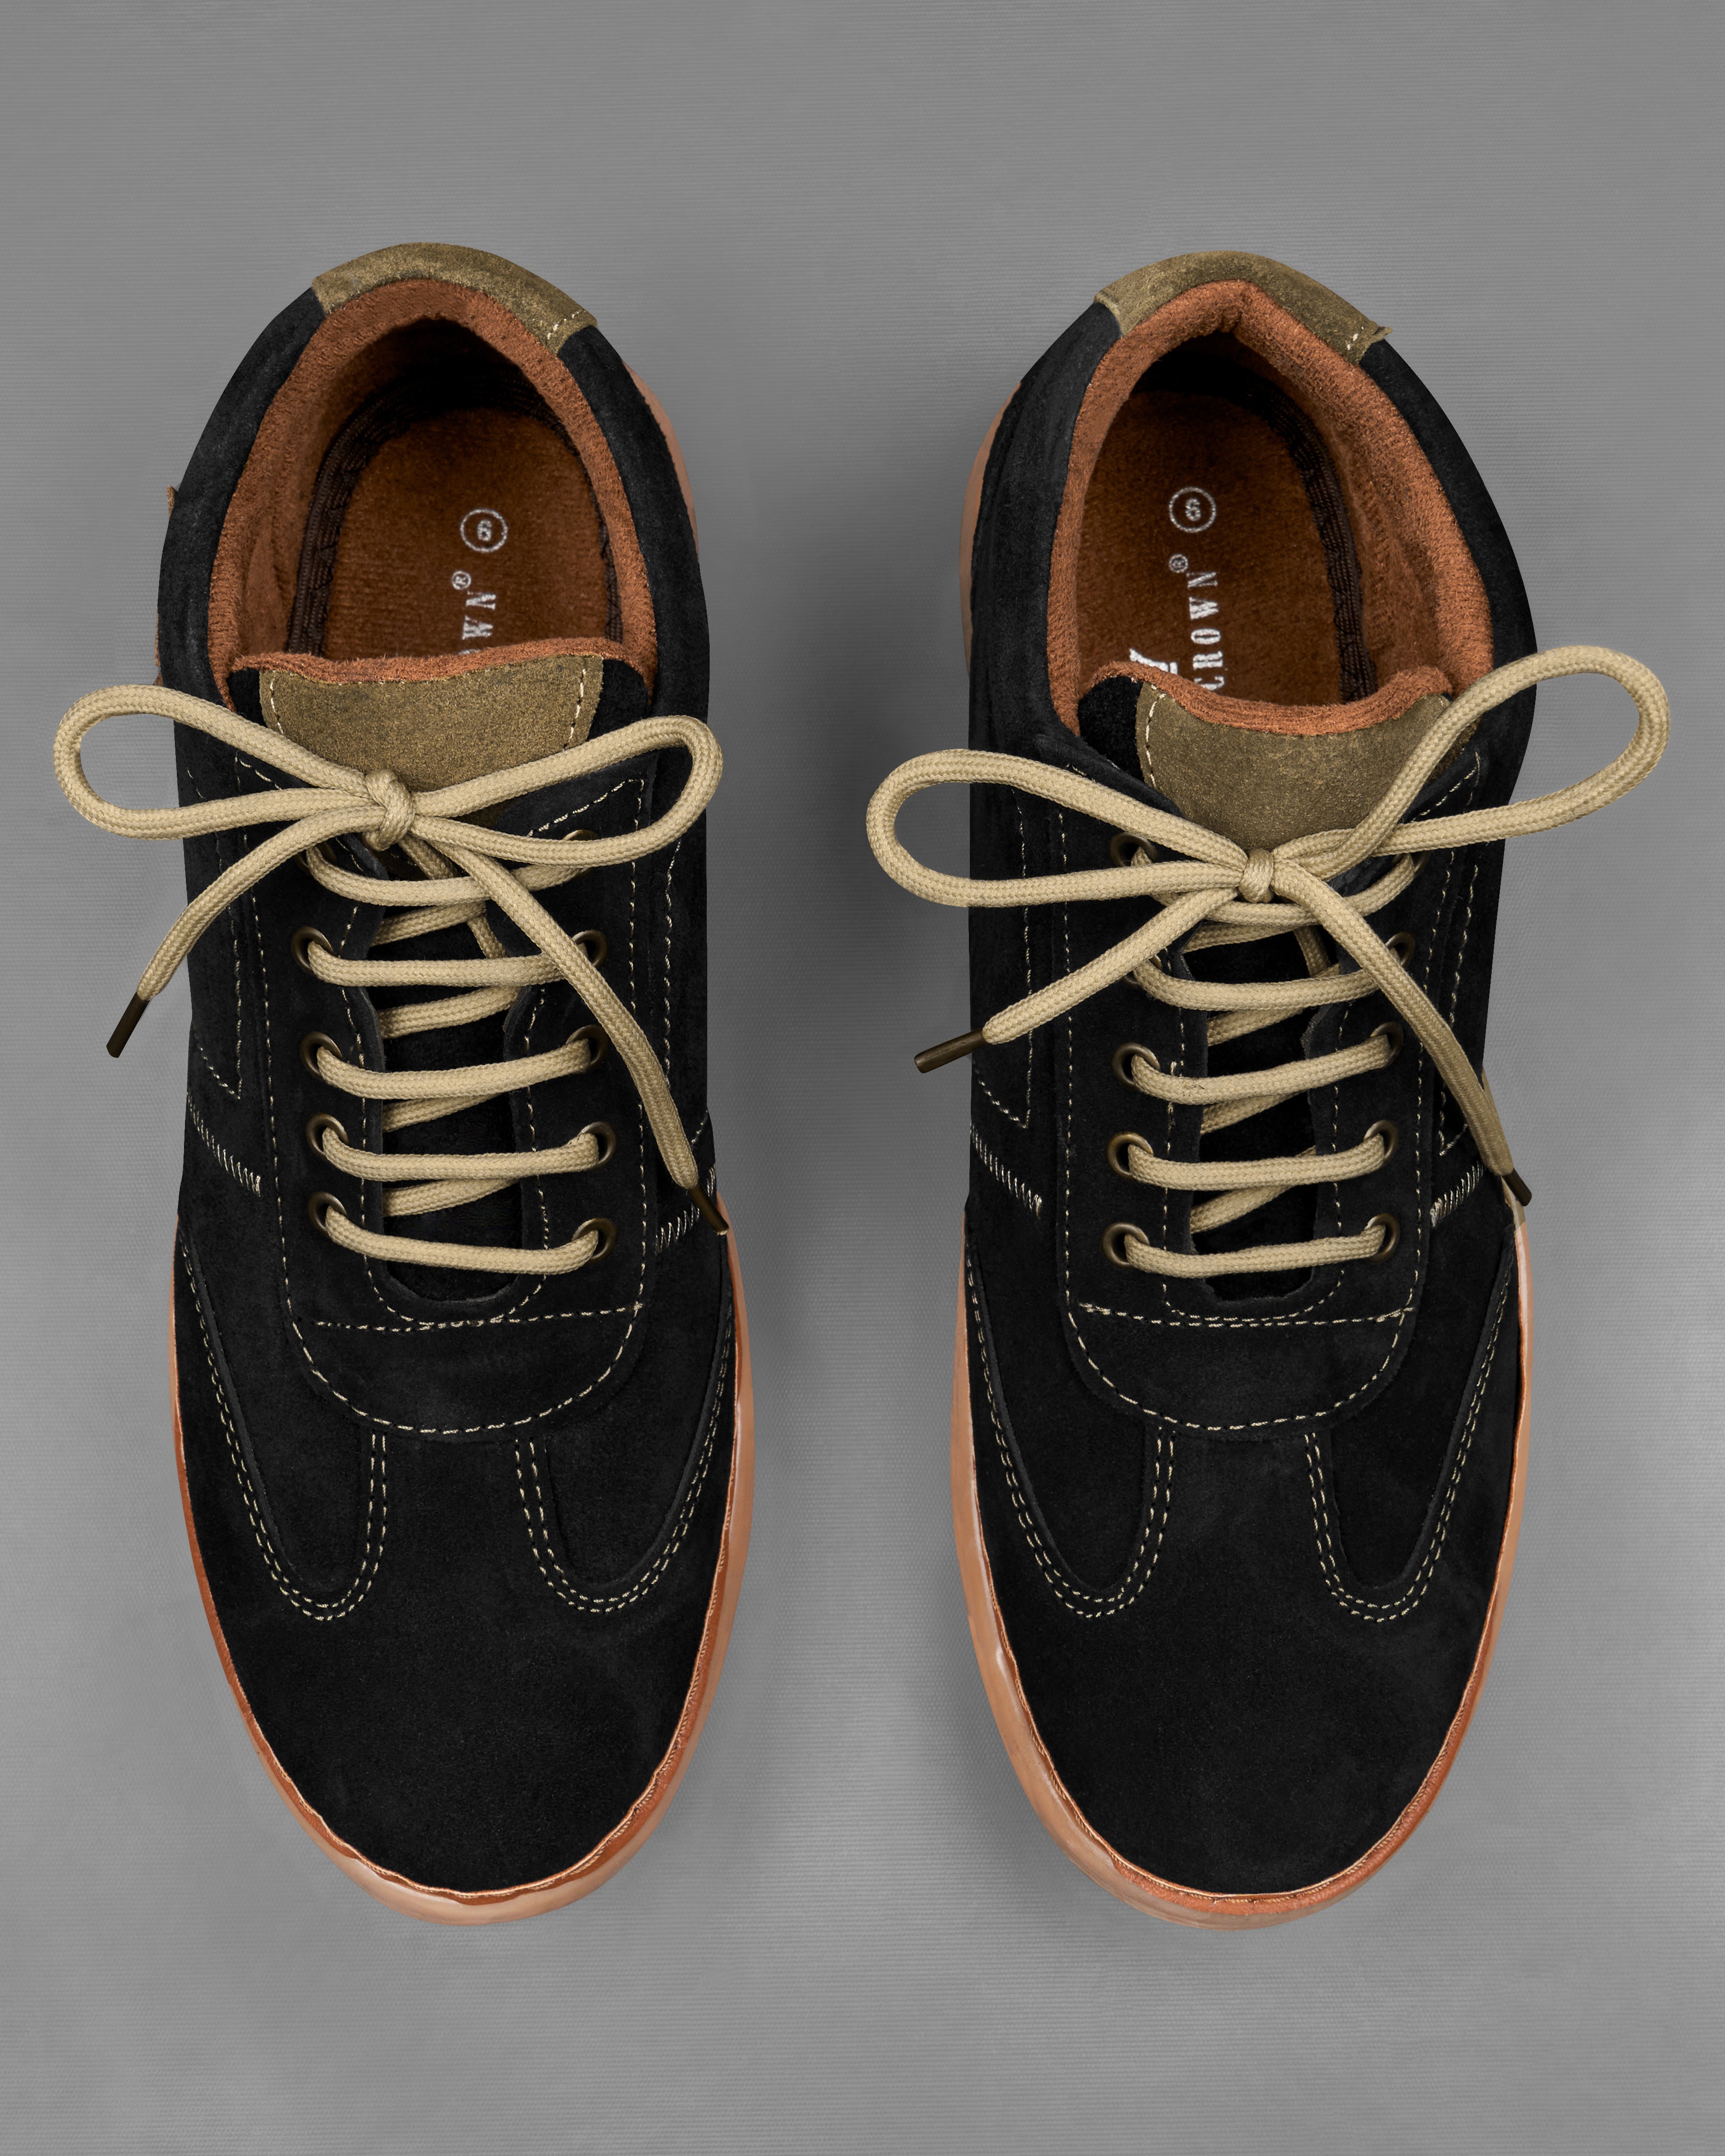 Jade Black with Cream Lace Chamois Derby Leather Shoes FT071-6, FT071-7, FT071-8, FT071-9, FT071-10, FT071-11